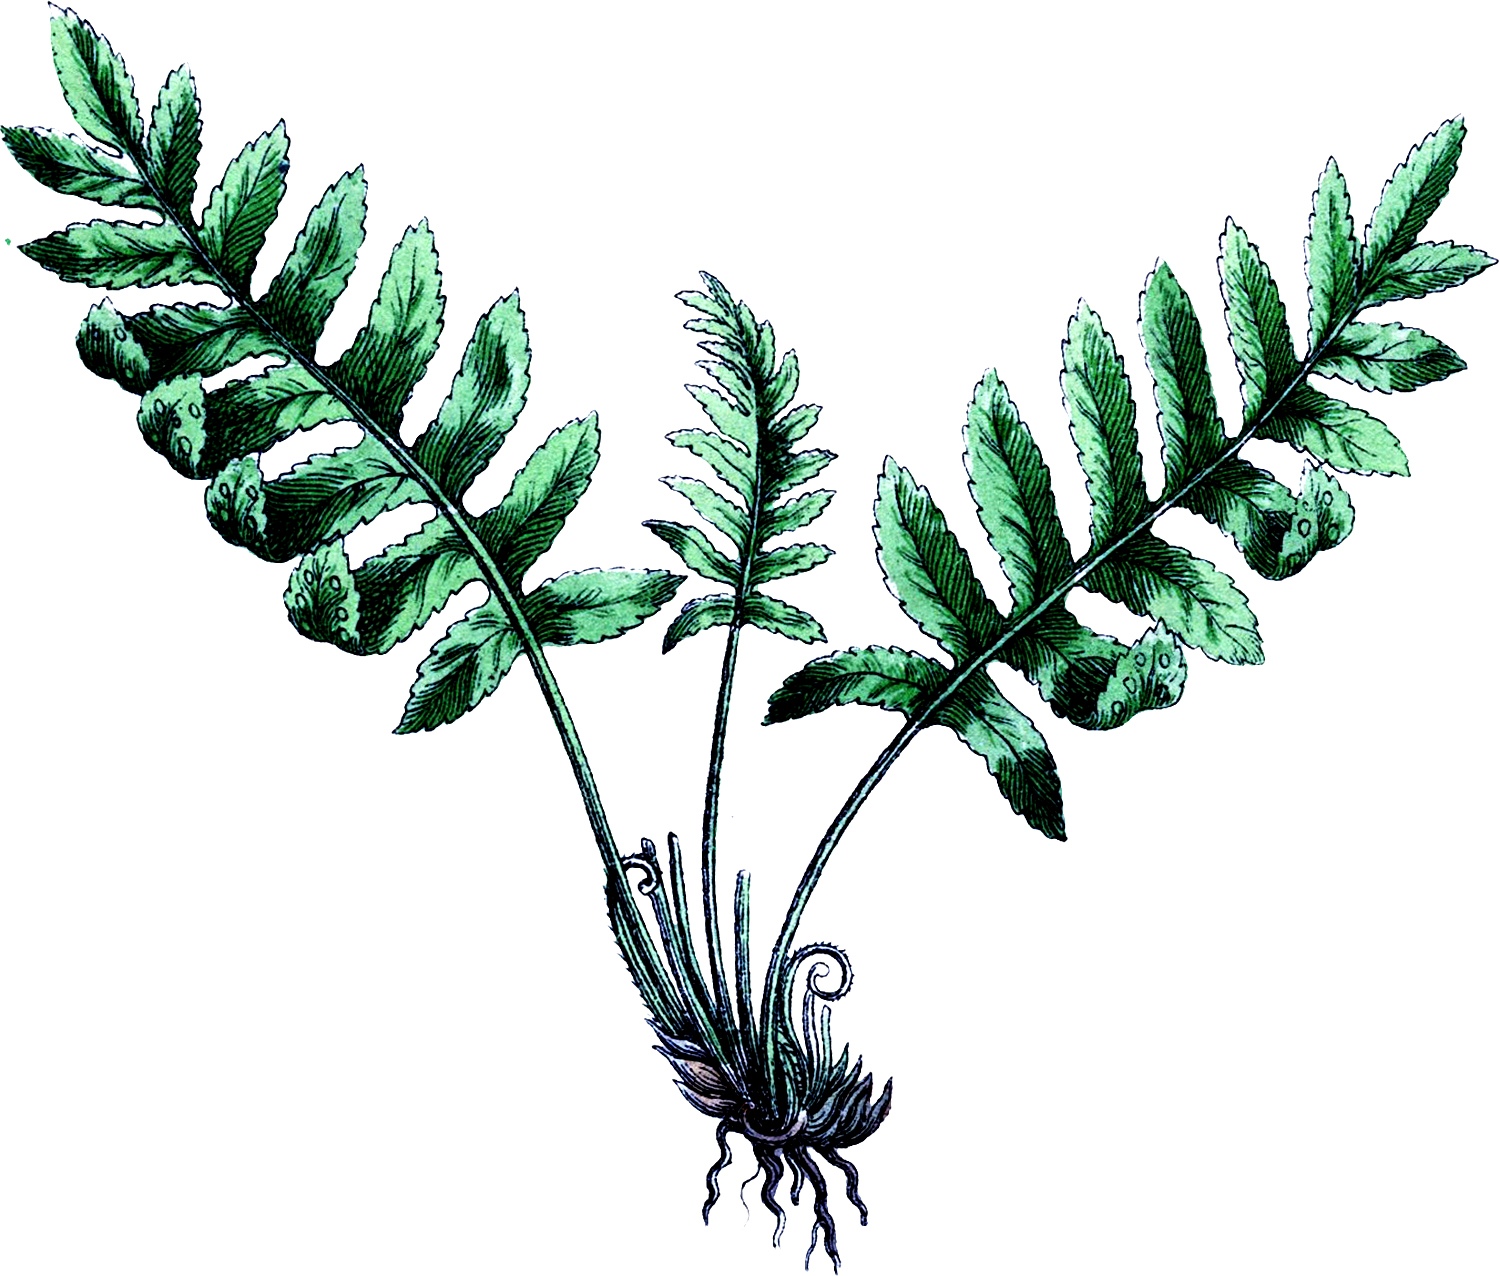 6-fern-pictures-vintage-botanicals-the-graphics-fairy